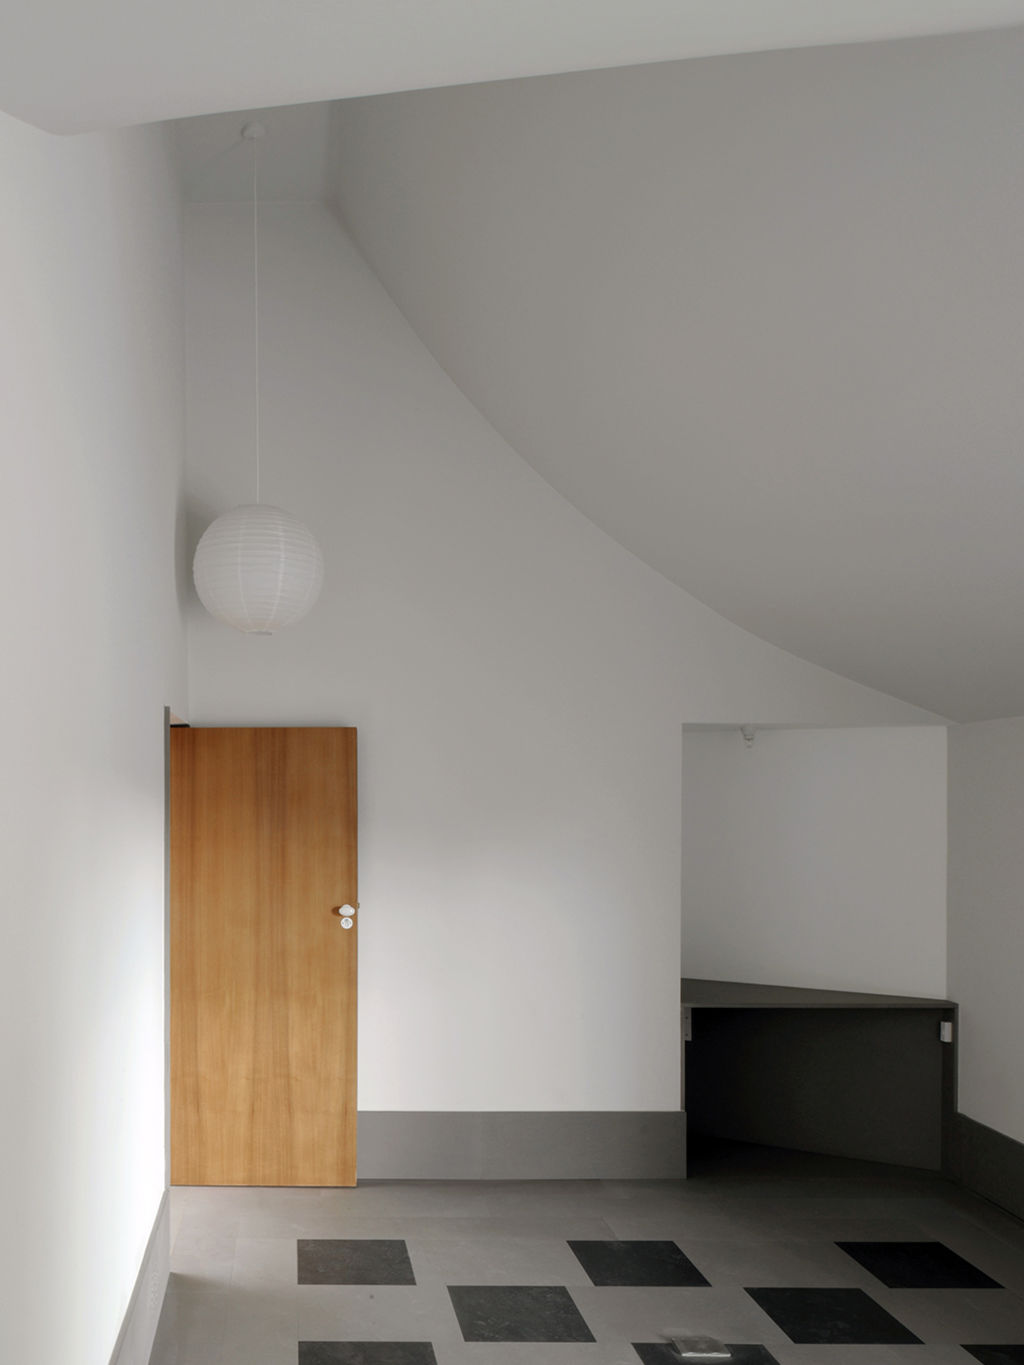 Ceilings in the bedrooms on the upper level follow the lines of the roof. Photo: David Leech